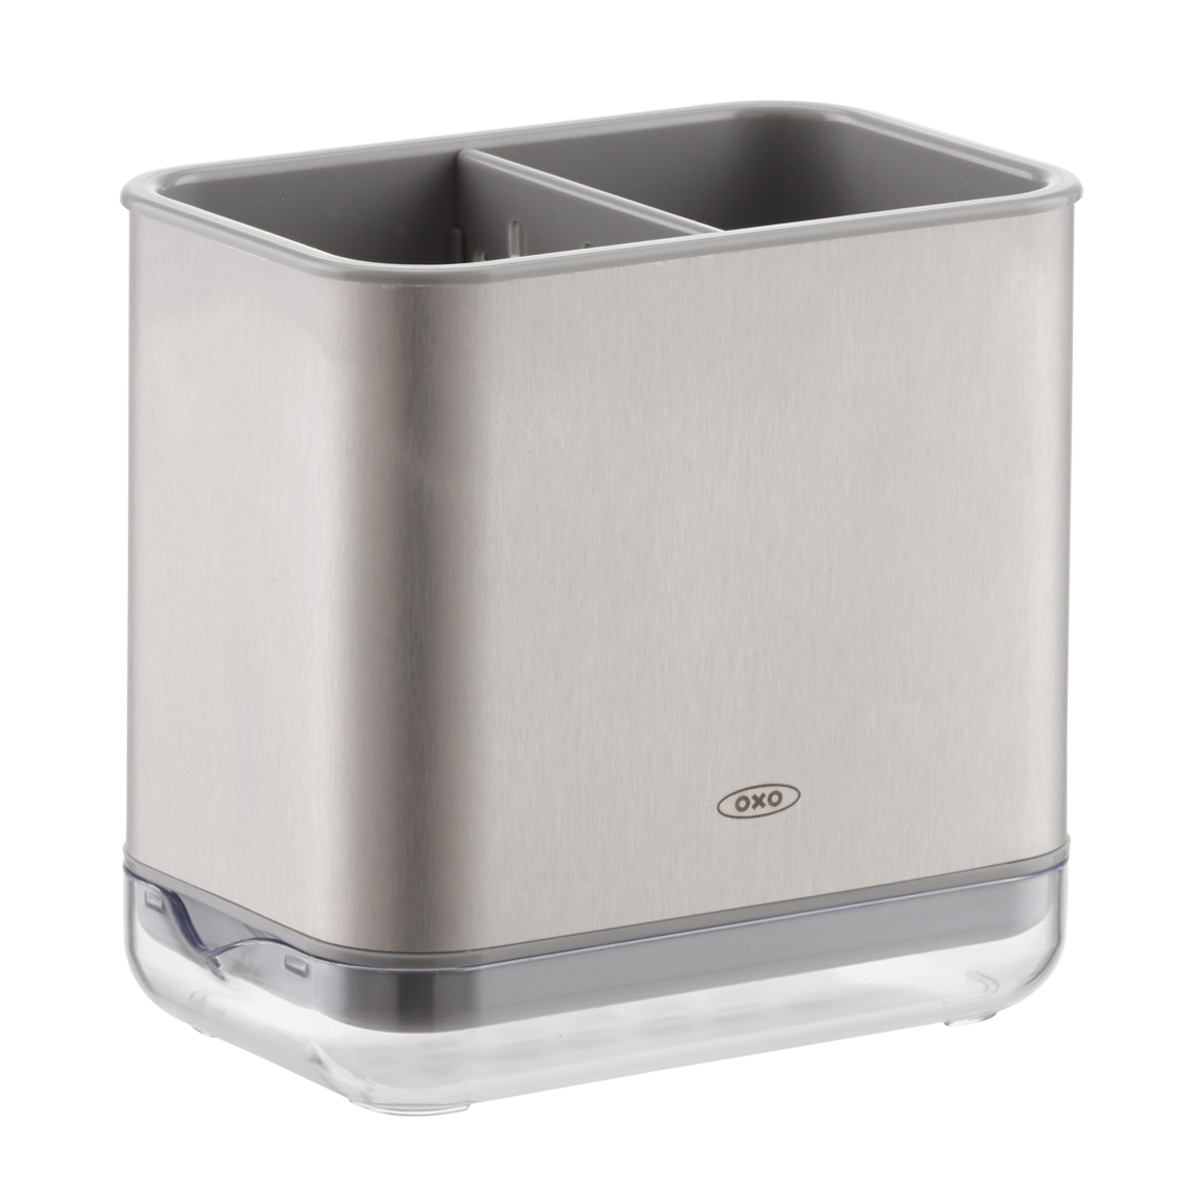 OXO Good Grips Stainless Steel Sinkware Caddy 13192100 - The Home